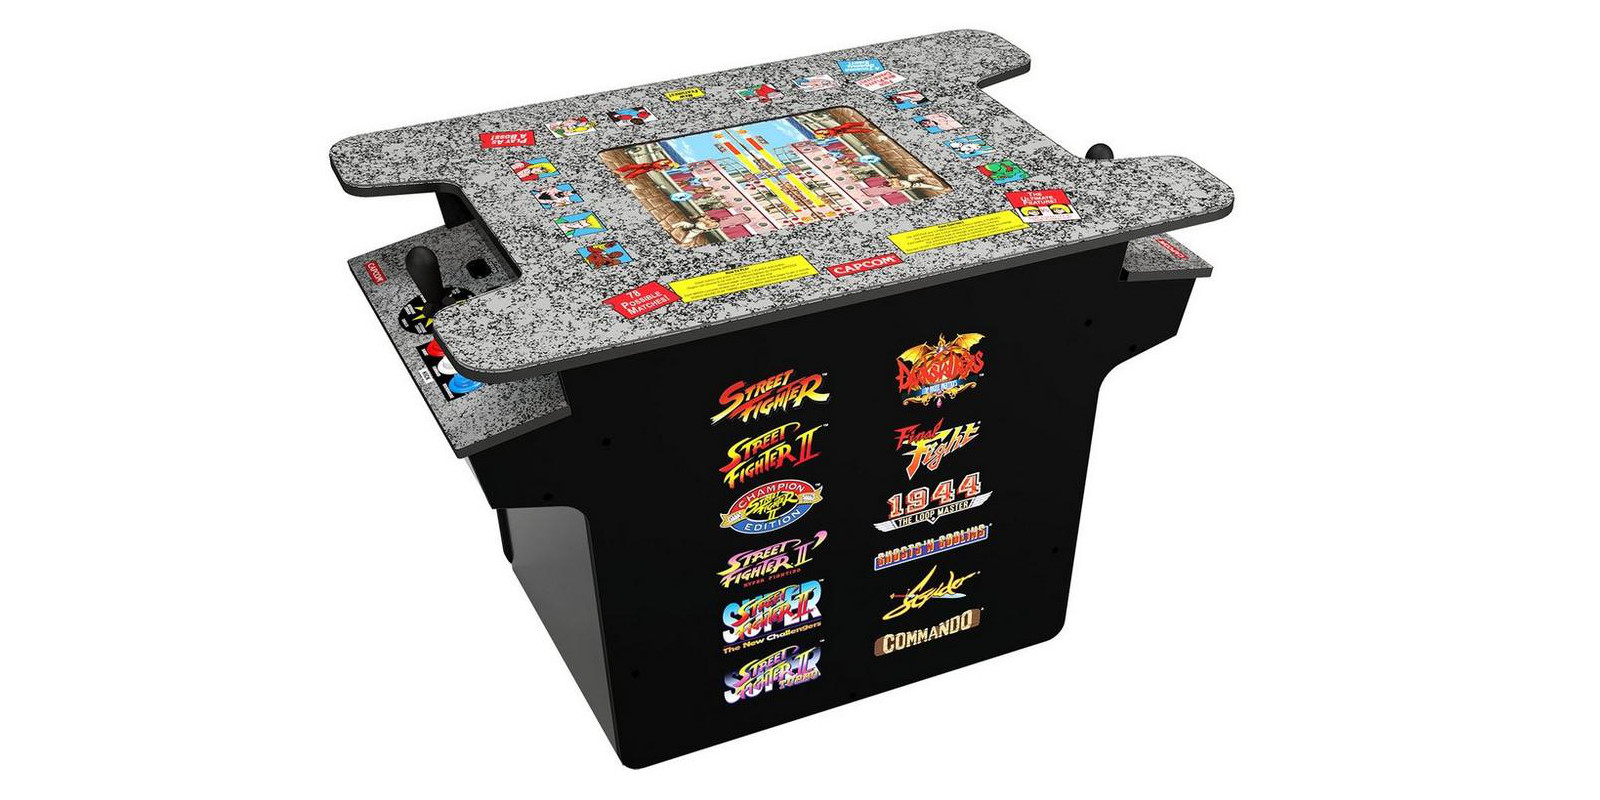 New Street Fighter cocktail cabinet now up for pre-order